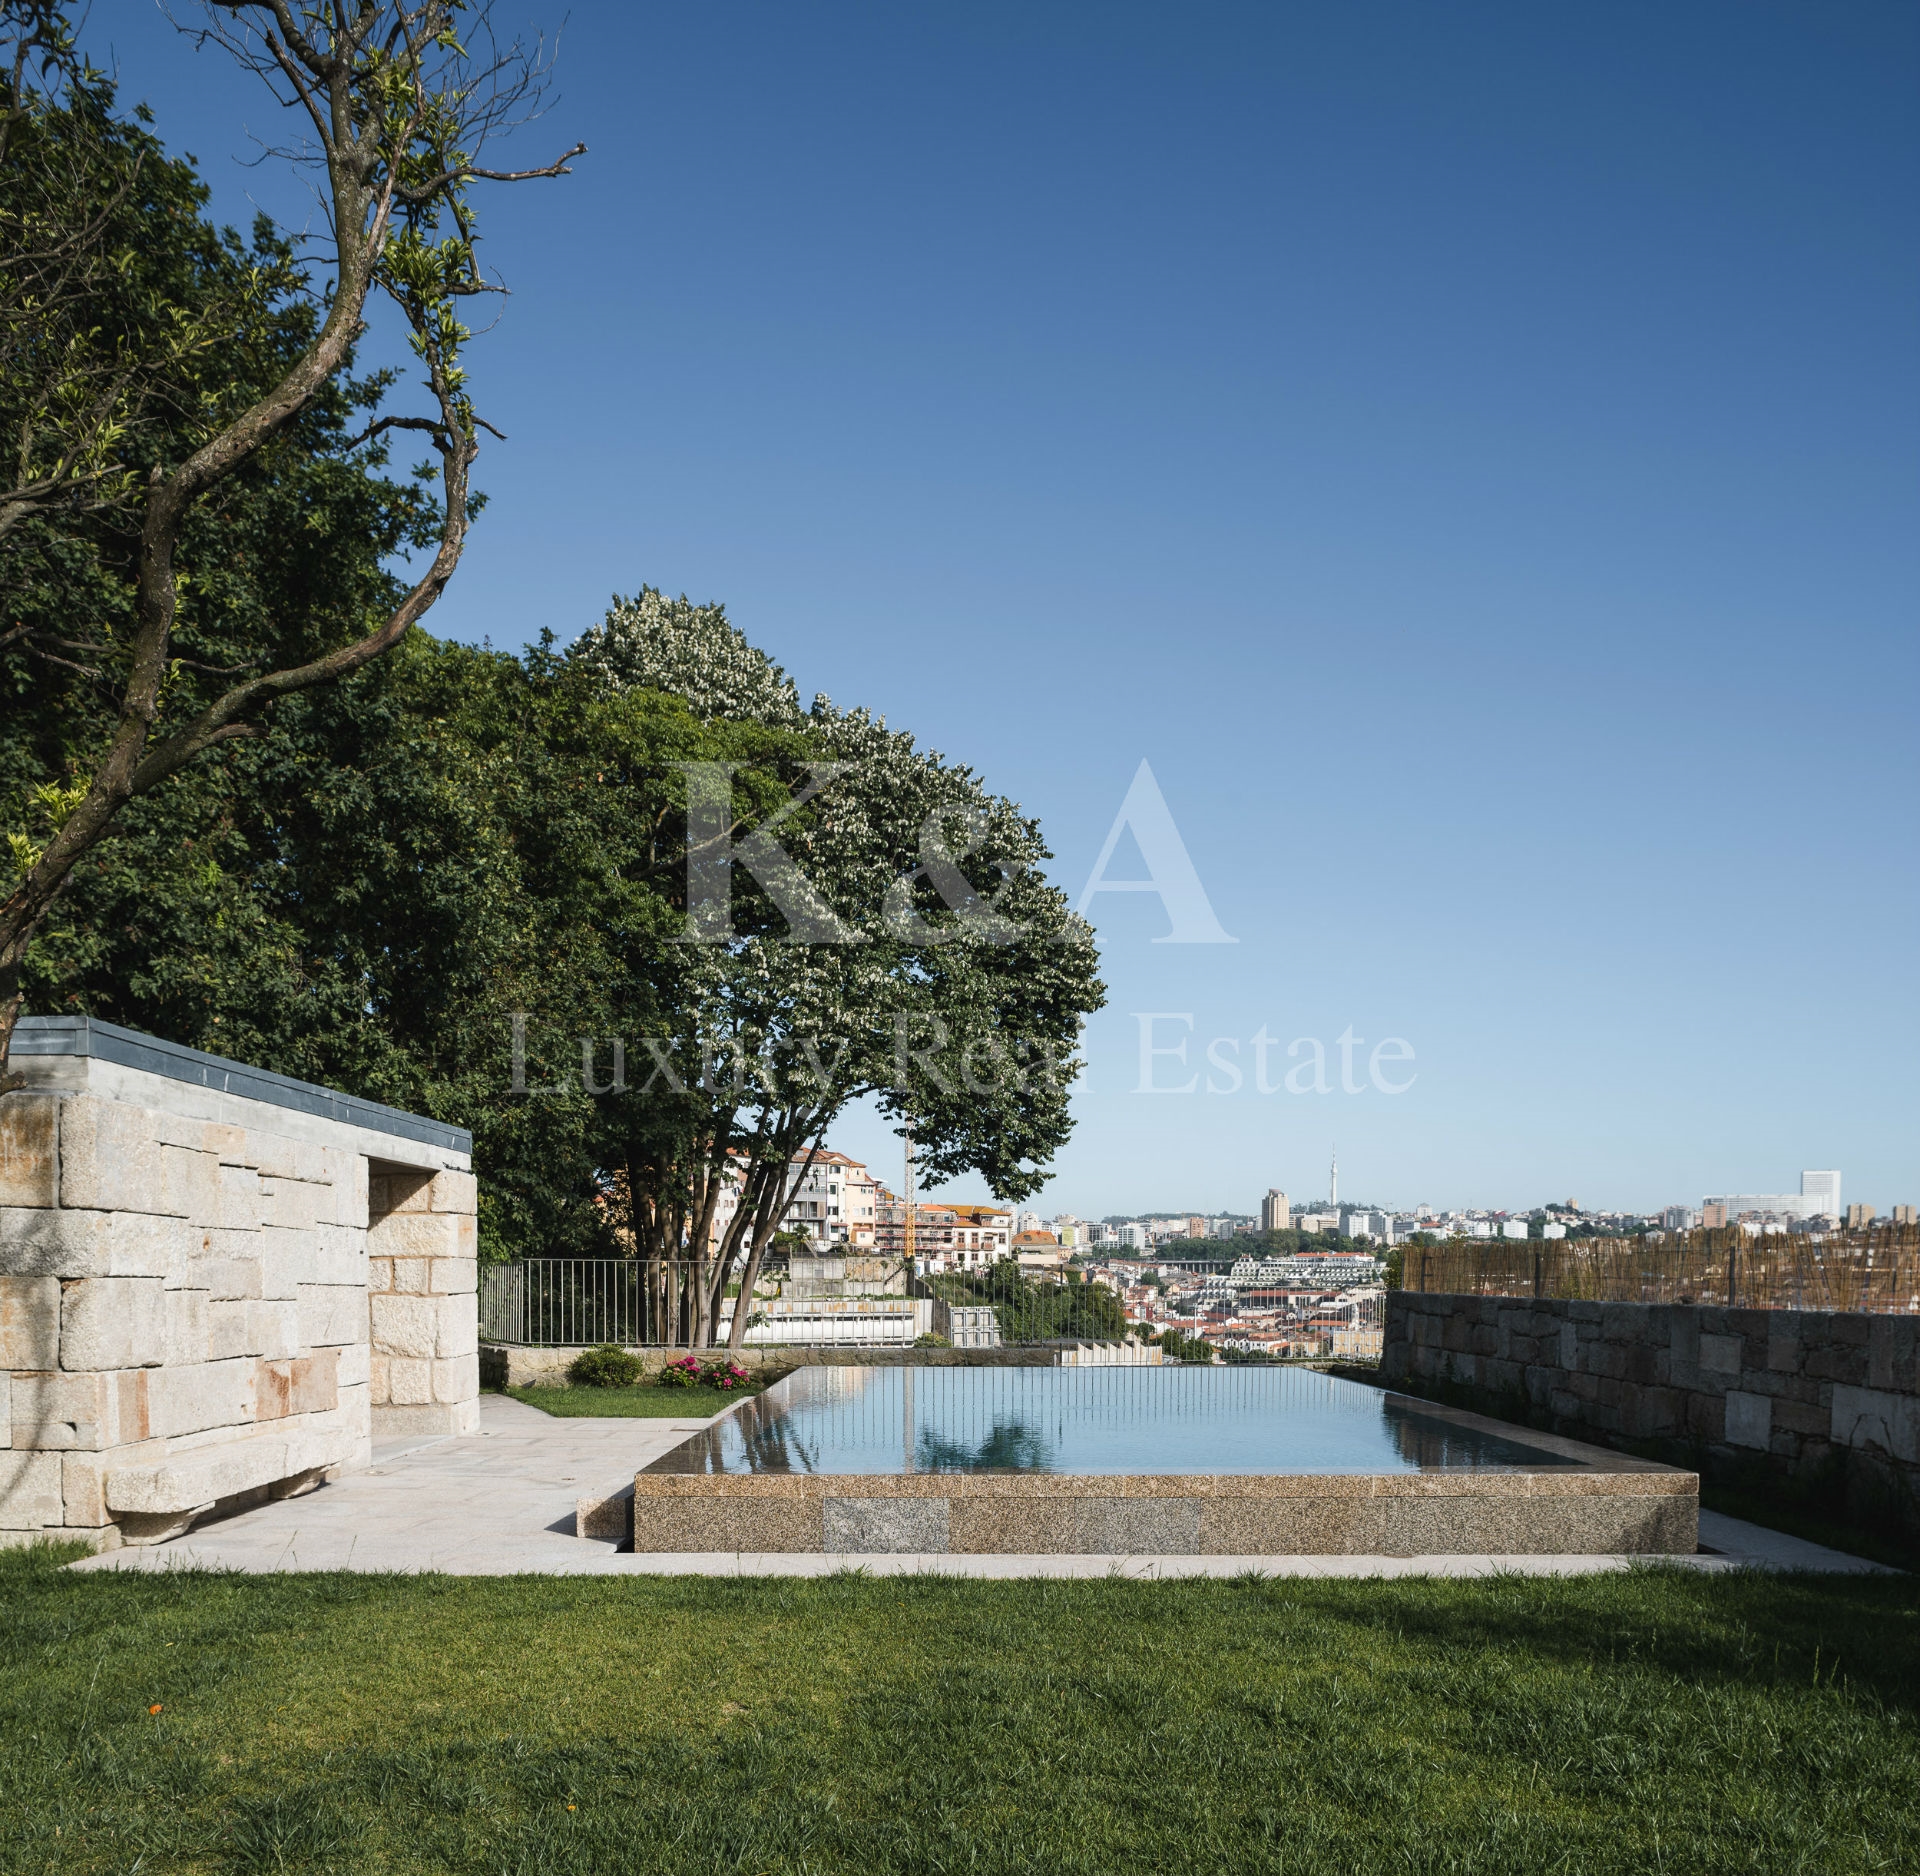  Duplex apartment with a pool and views over the Douro River in downtown Porto.